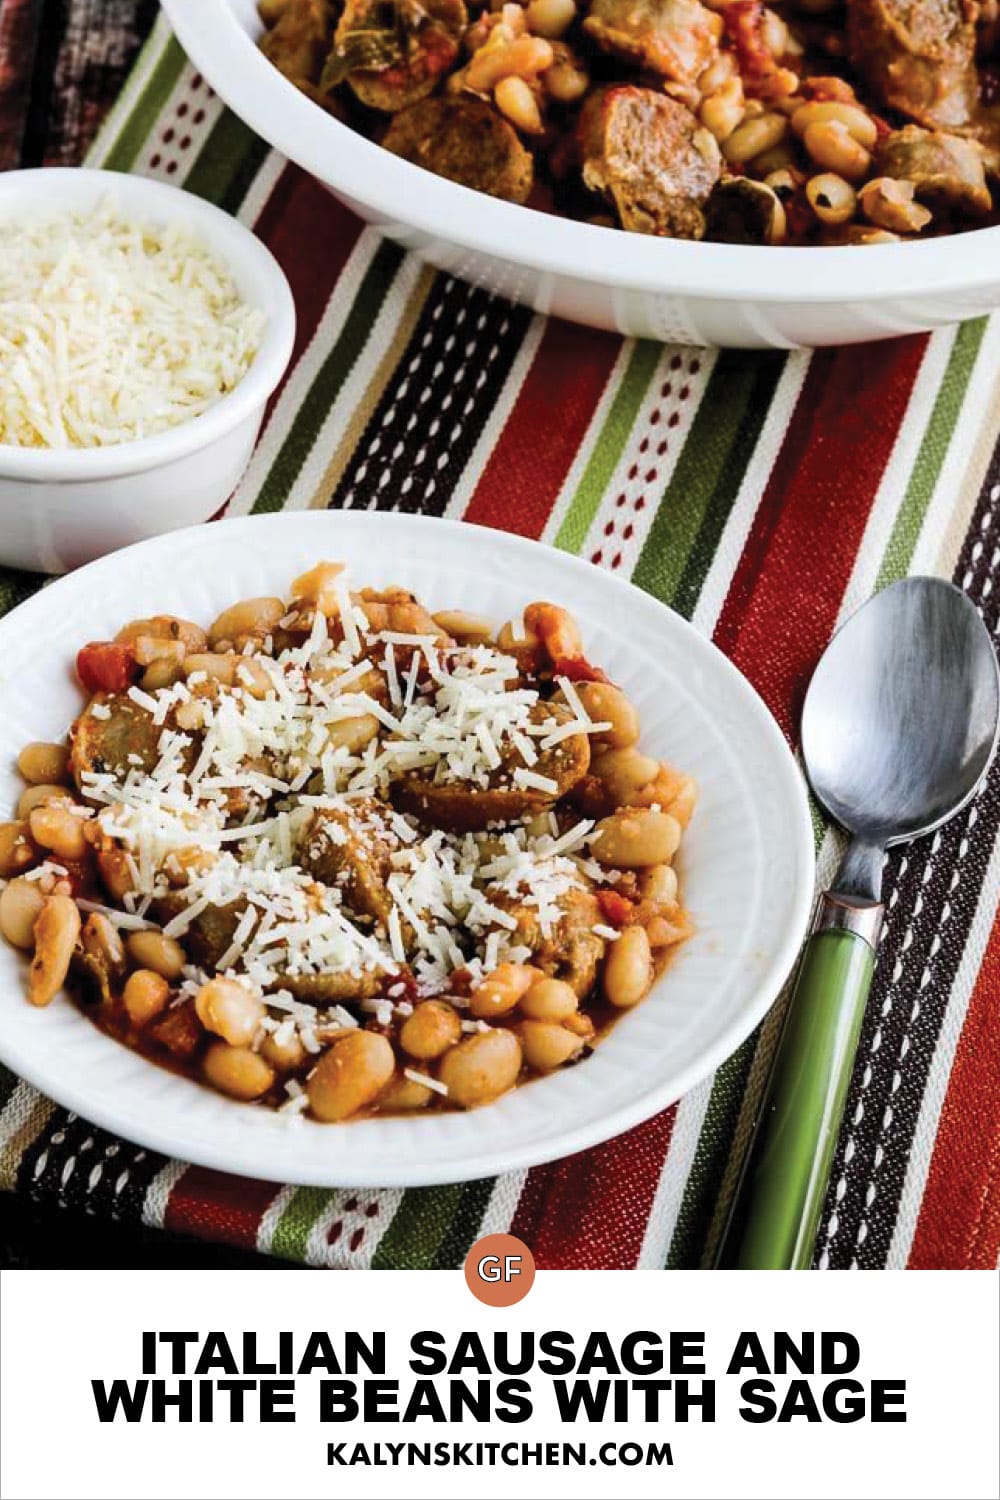 Pinterest image of Italian Sausage and White Beans with Sage